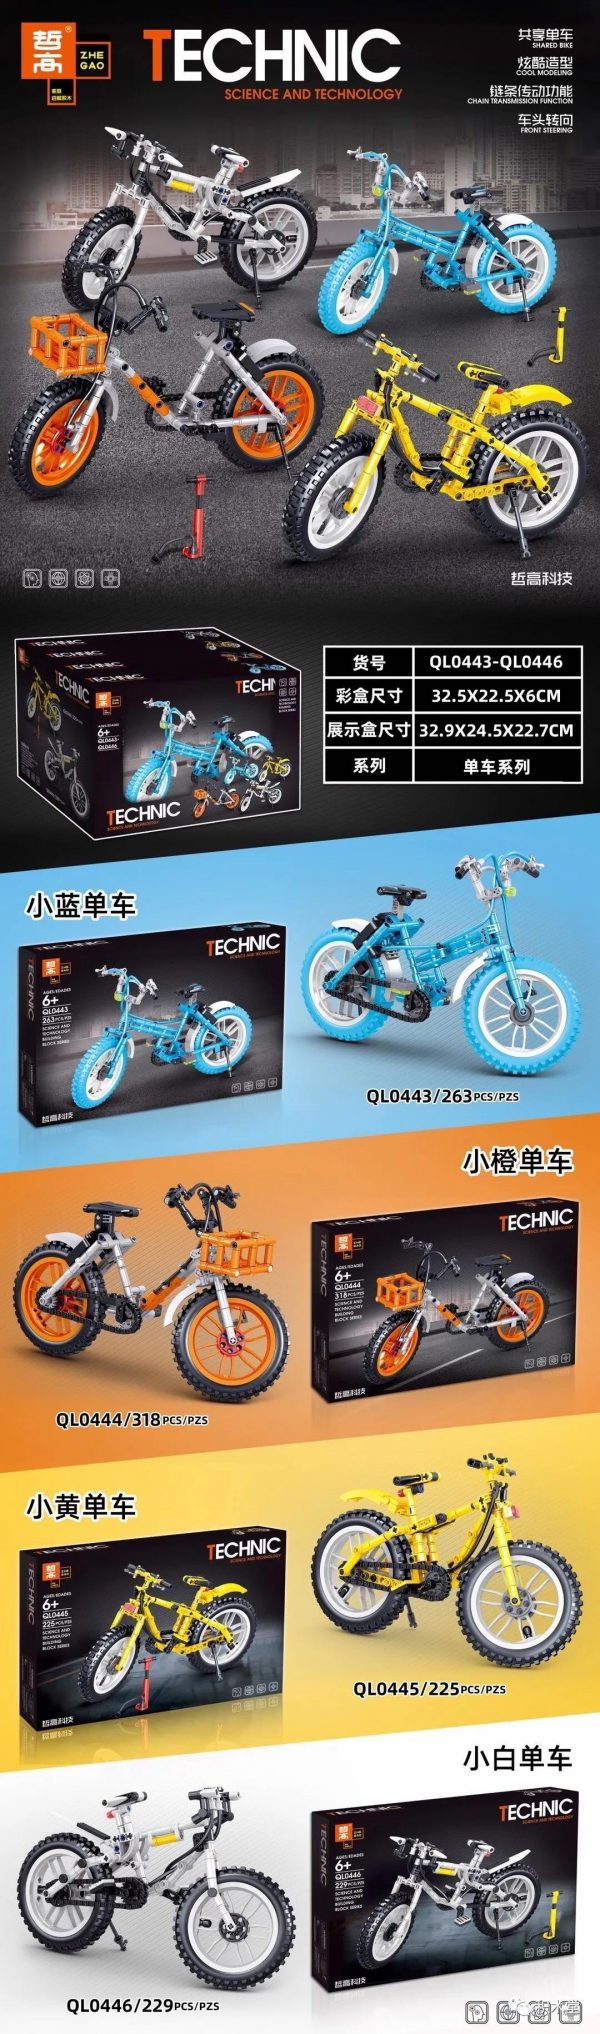 ZHEGAO QL0445 Shared bicycles 4 types of small blue bicycles, small orange bicycles, small yellow bicycles, and small white bicycles 0